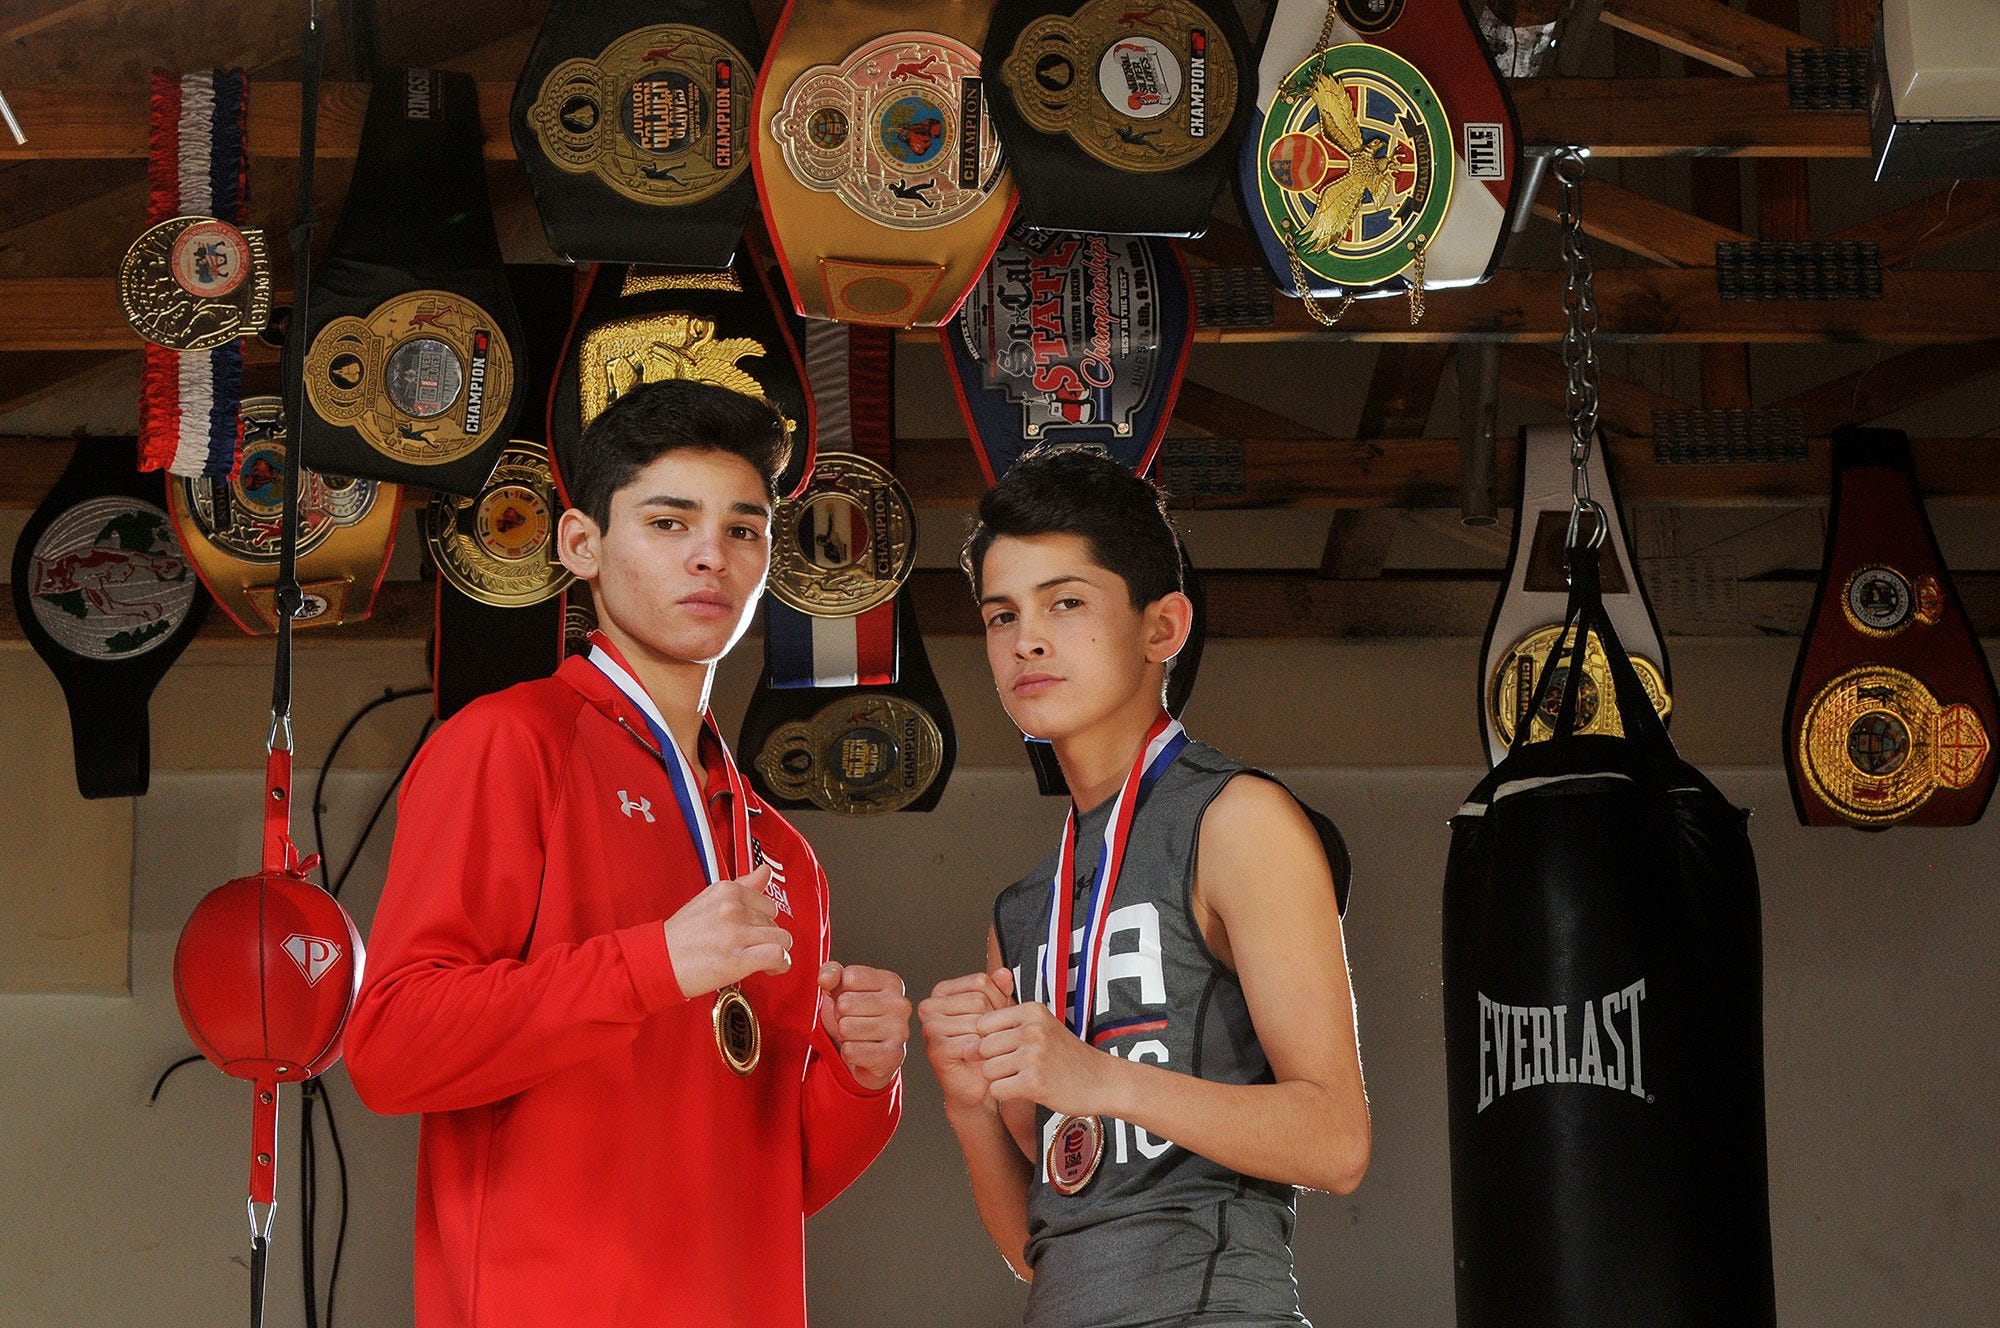 Victorville's Garcia earns right to fight Team USA in Russia